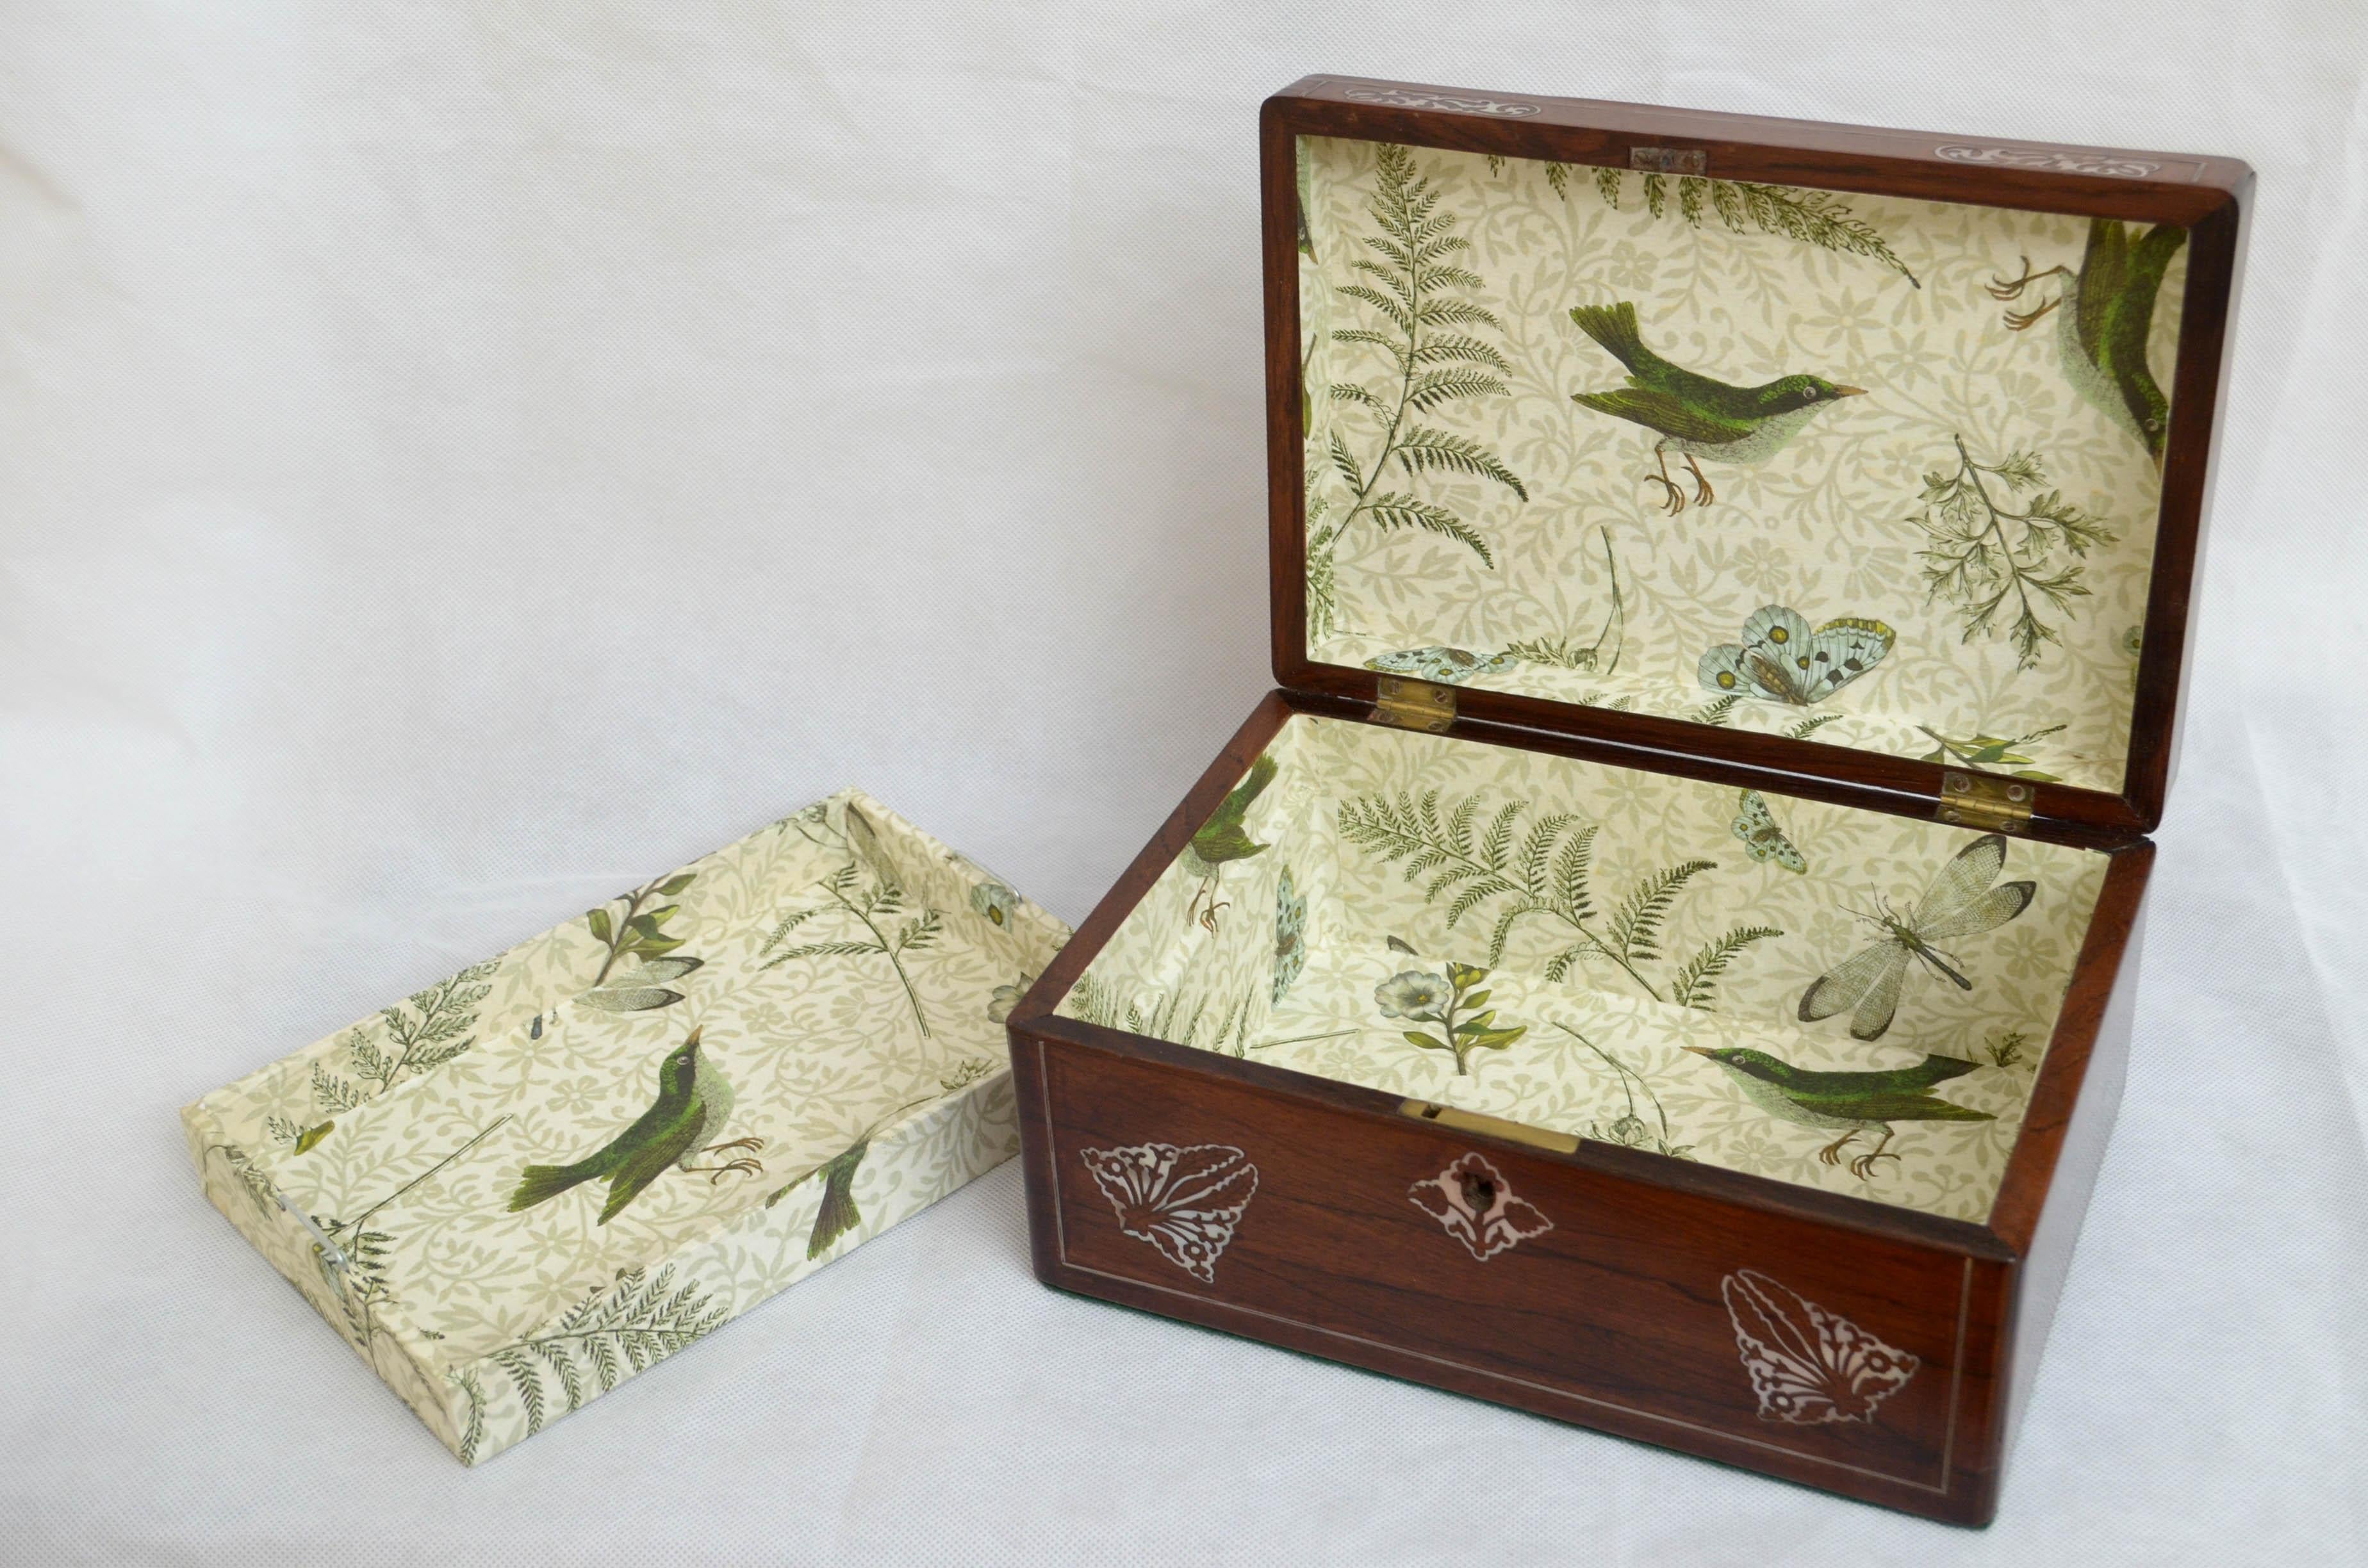 Elegant Early Victorian Jewelry Box with Tray For Sale 2